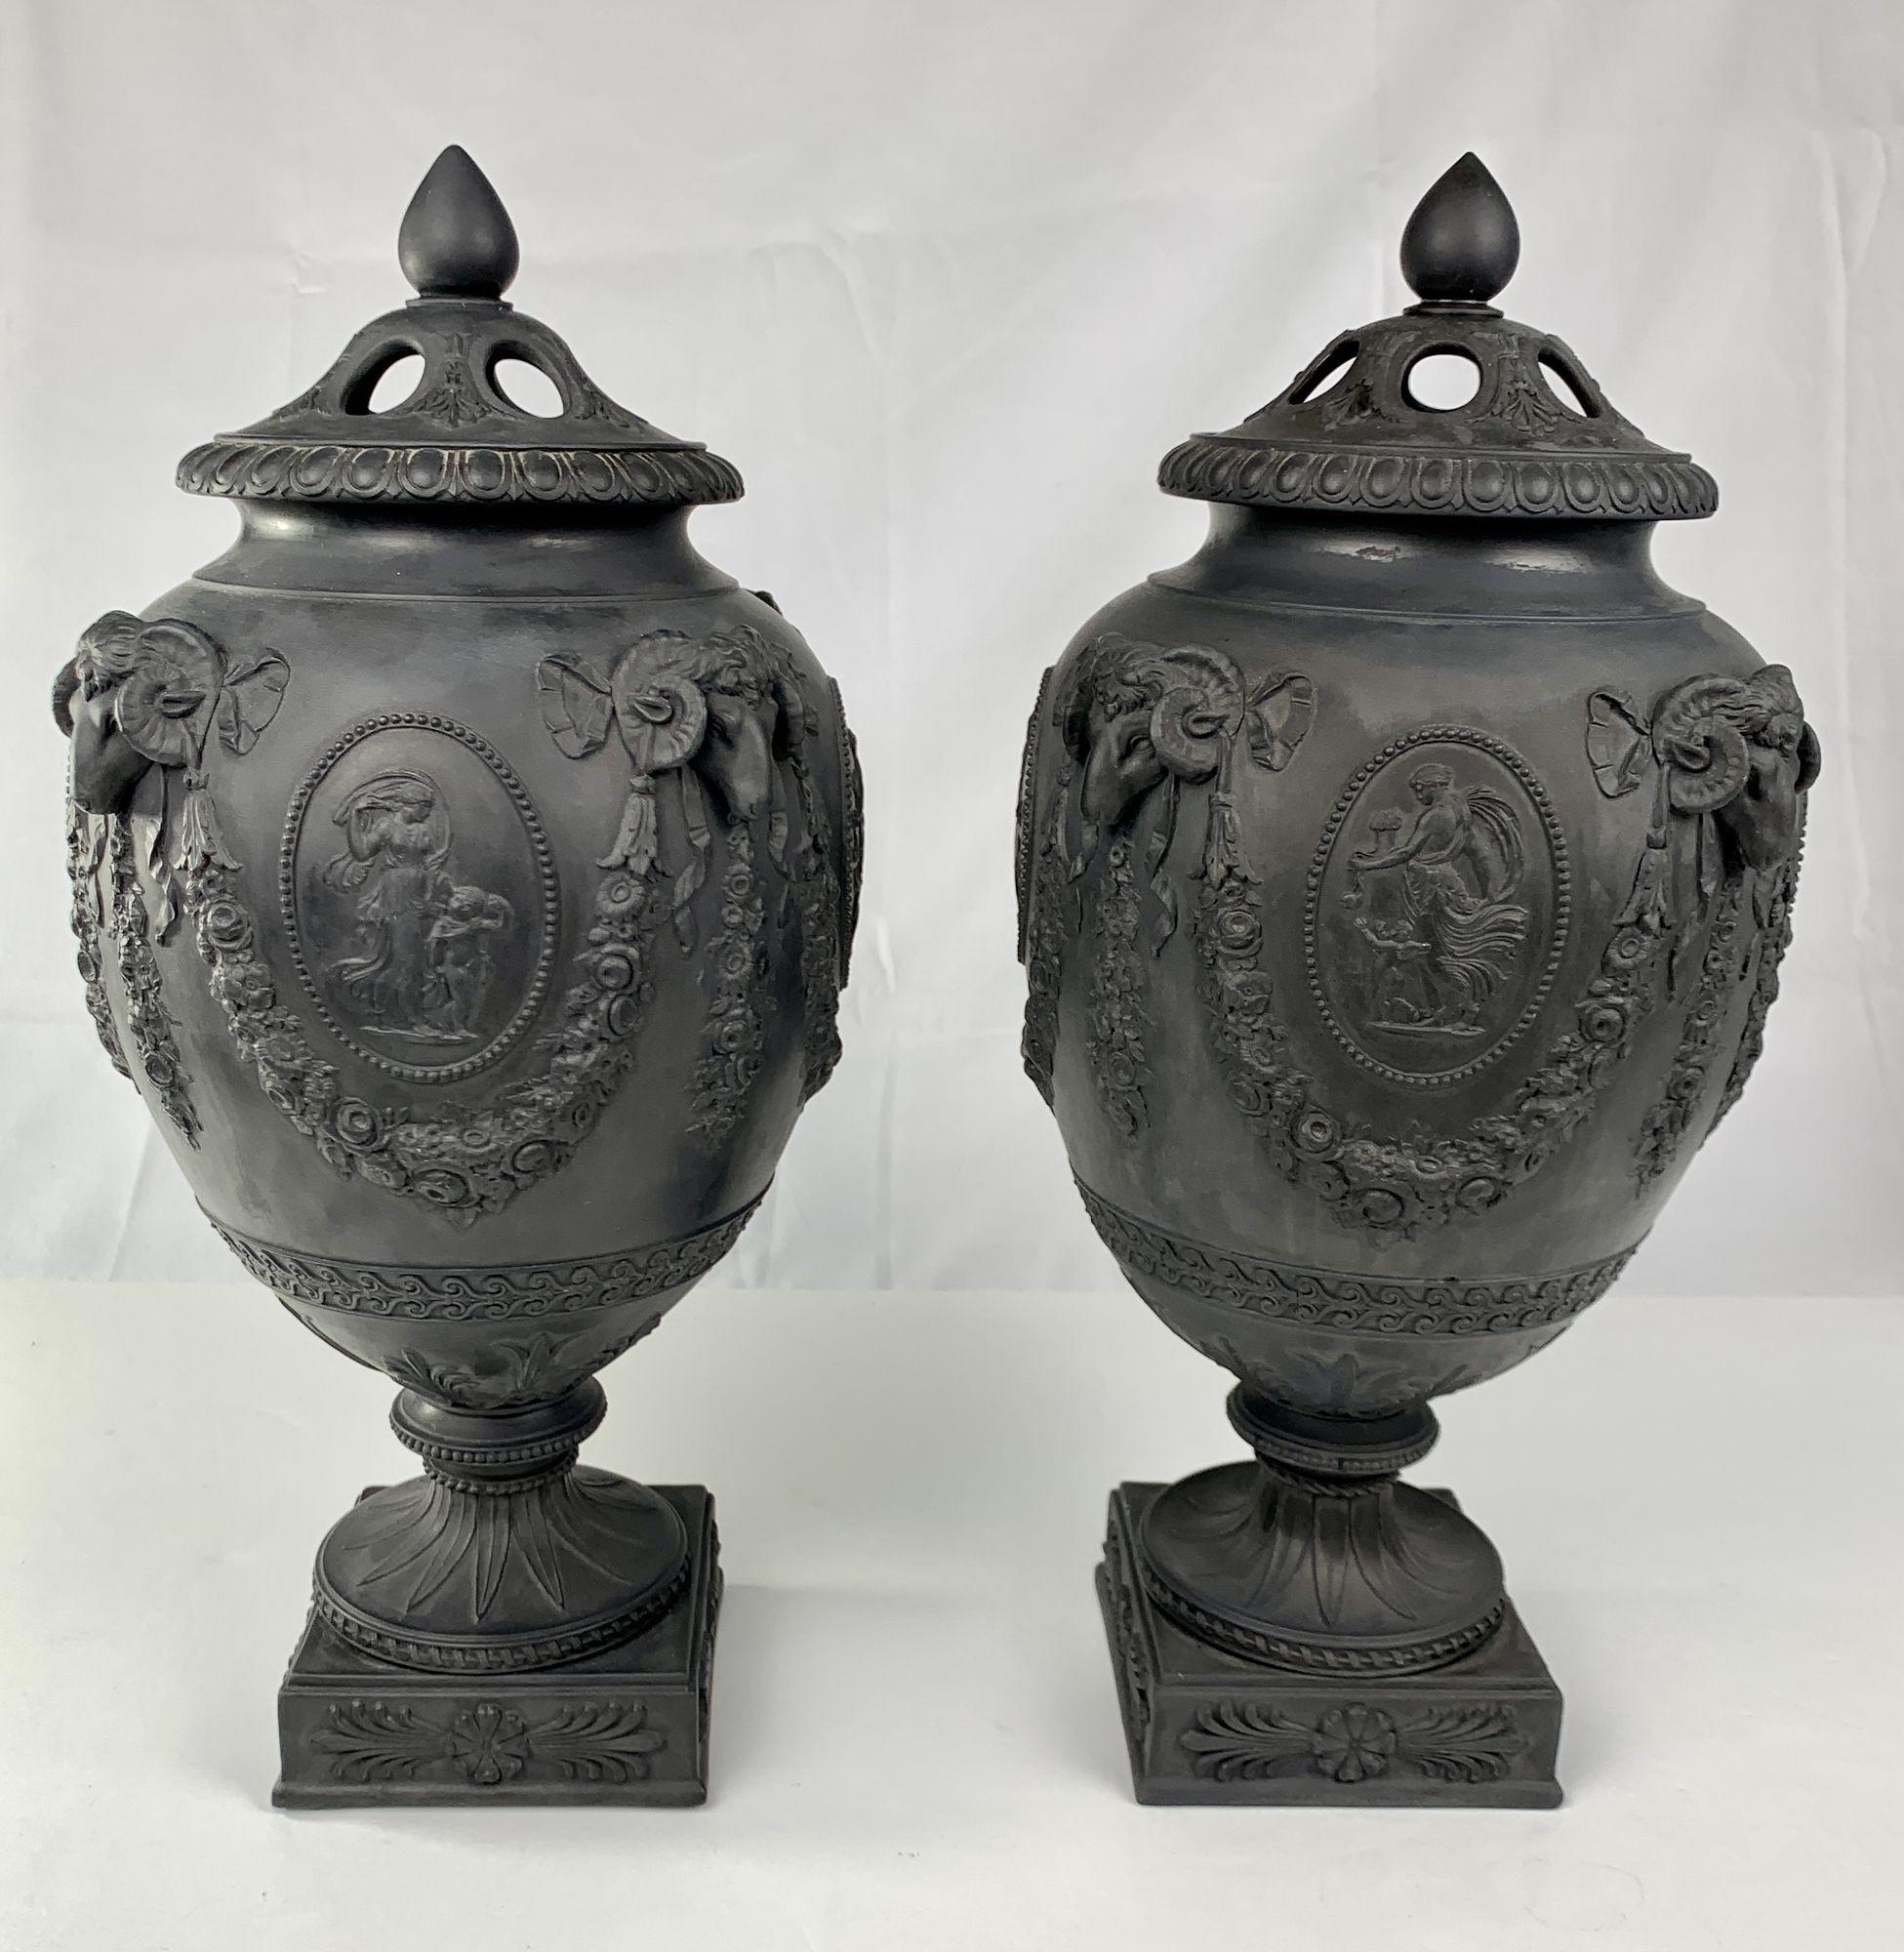 Wedgwood and Bentley made the design and molds for this pair of exquisite Wedgwood black basalt urns in the late 18th century. 
This lustrous pair was made circa 1840. 
Original antiquities from vases in the collections of 18th-century English